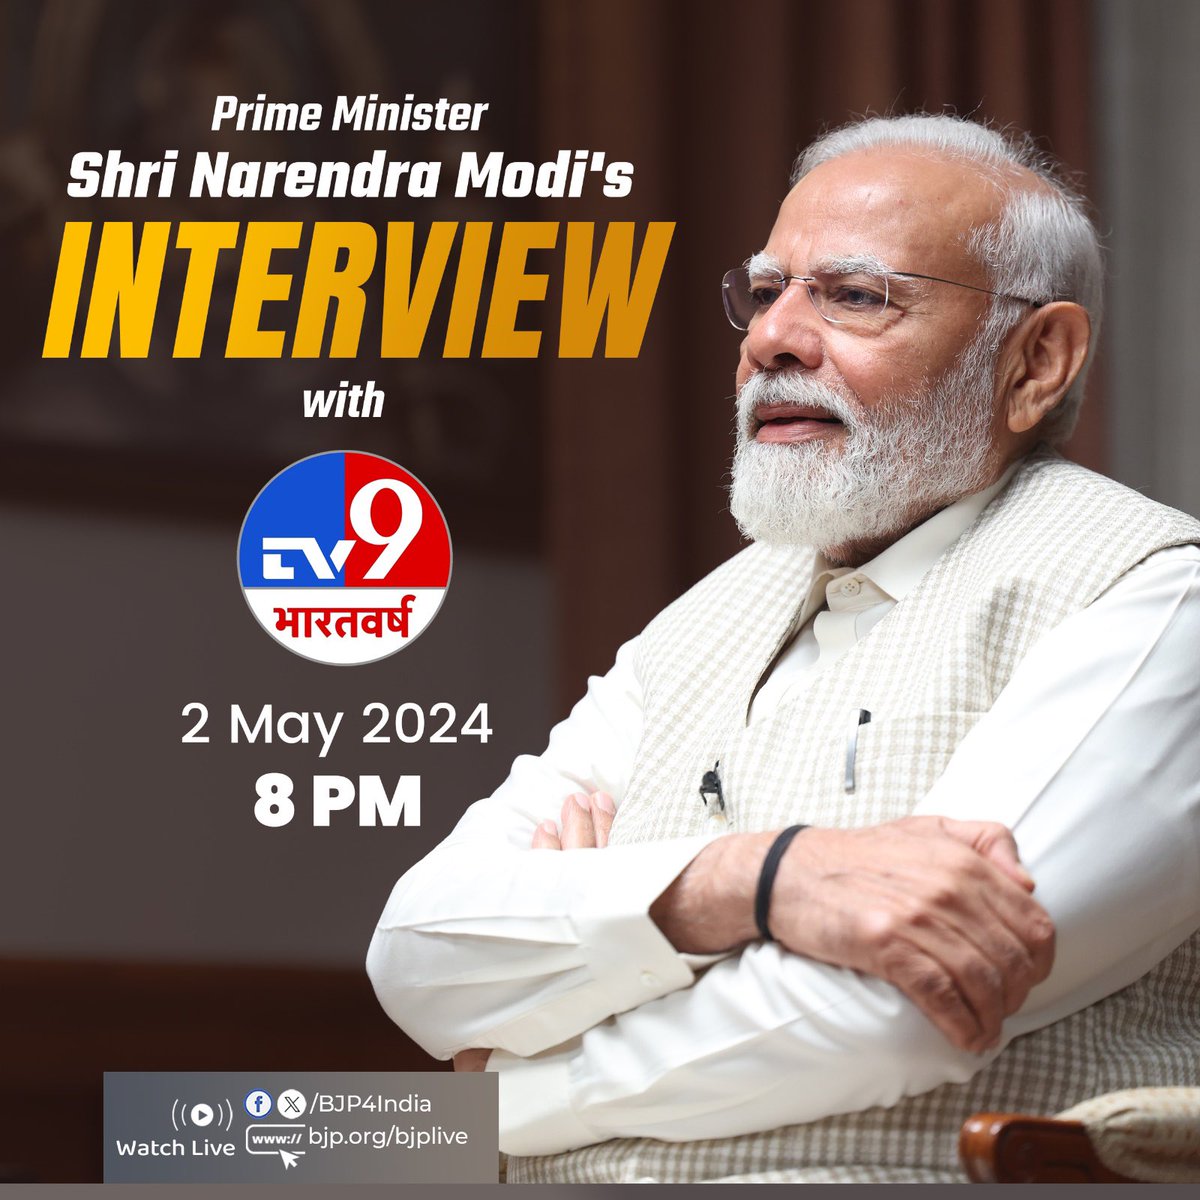 PM Modi’s interview with TV9 Bharatvarsh to be telecasted tonight at 8 PM. Watch live: 📺x.com/bjp4india 📺facebook.com/BJP4India 📺youtube.com/BJP4India 📺bjp.org/bjplive